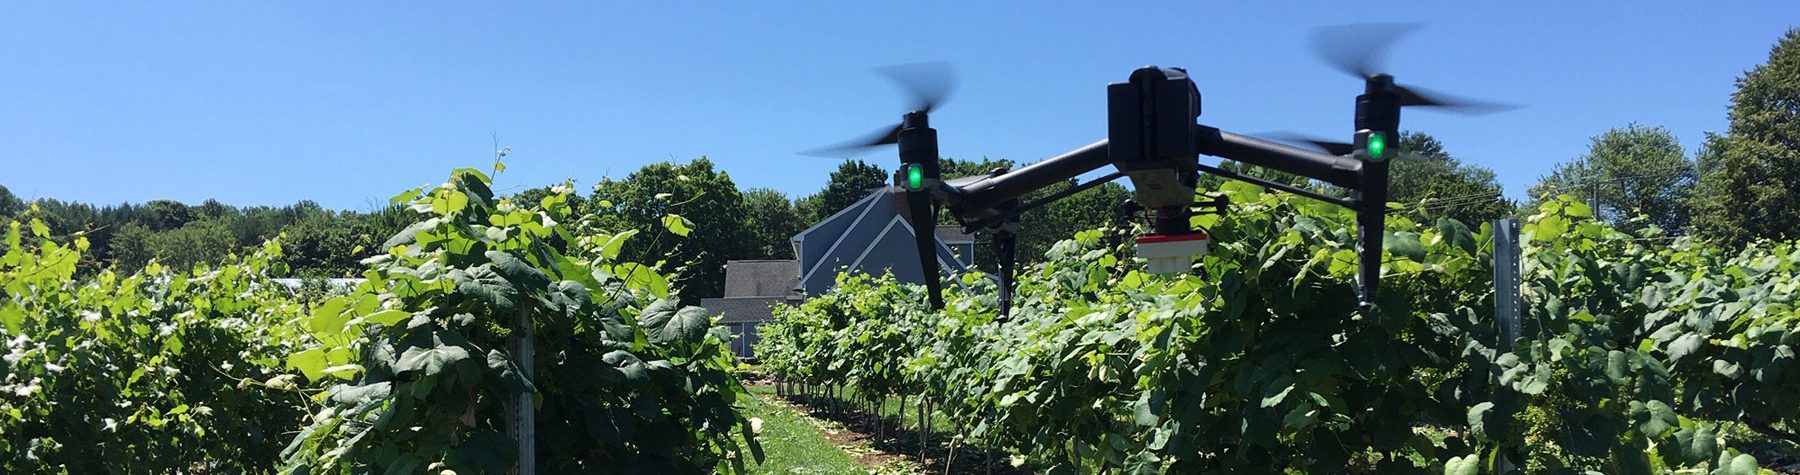 Remote Sensing Online Graduate Certificate: Image of Drone Flying within Agricultural Fields